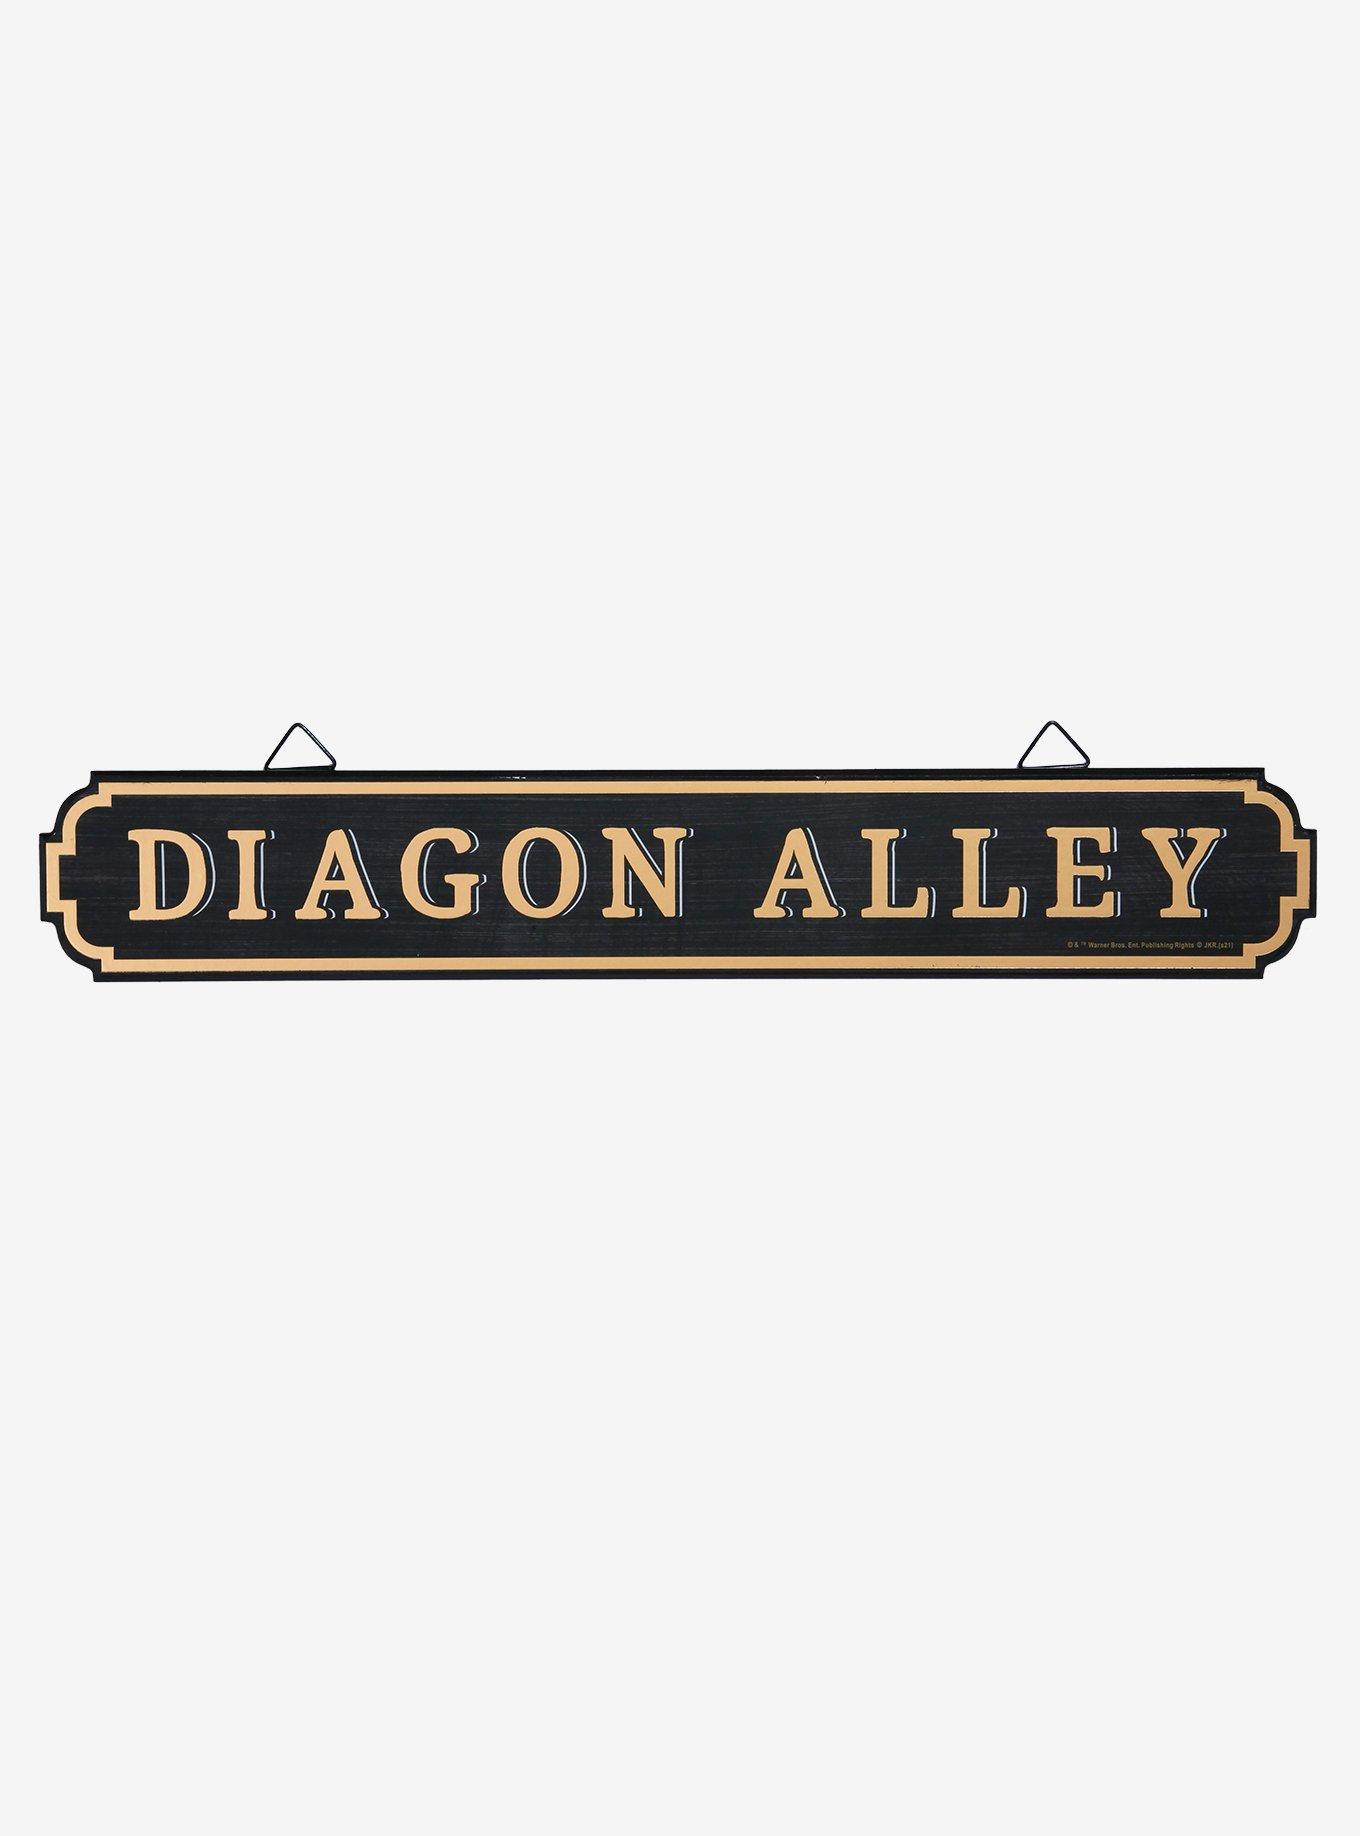 Diagon Alley Wood Sign. 